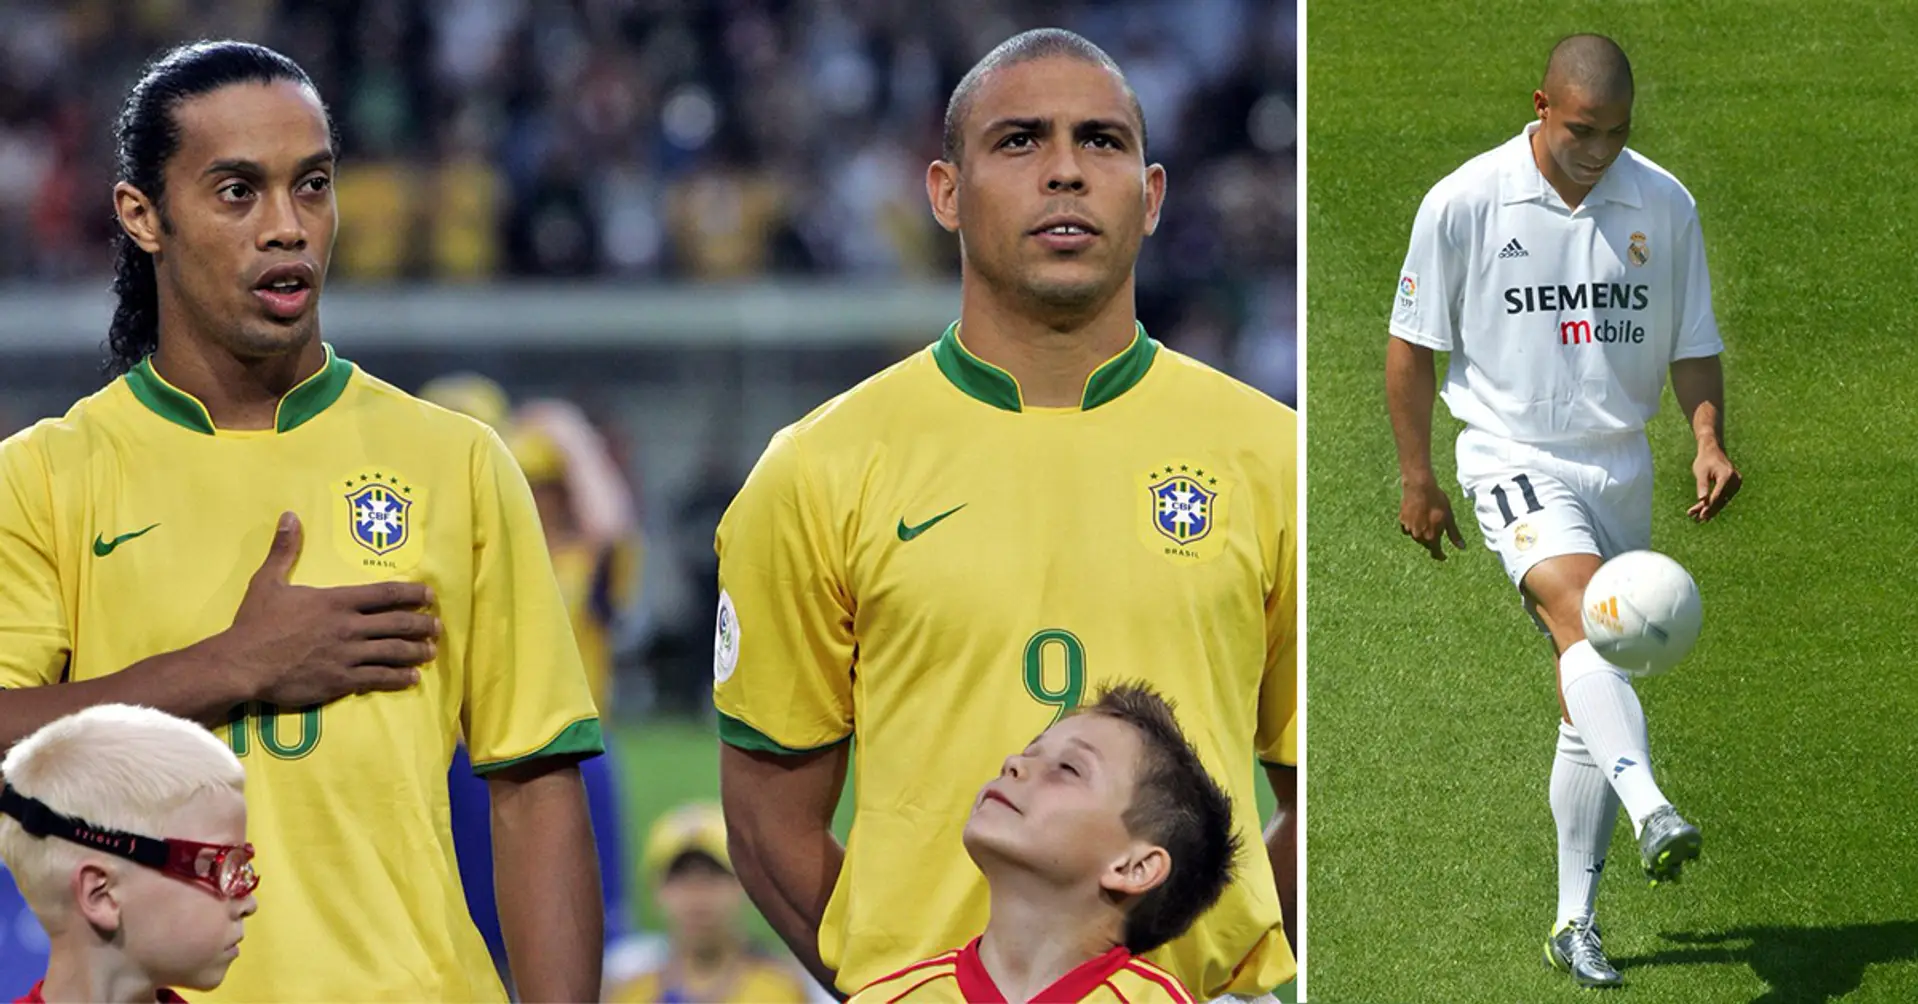 Ronaldinho and Ronaldo Nazario named the toughest opponent they've ever faced on the pitch